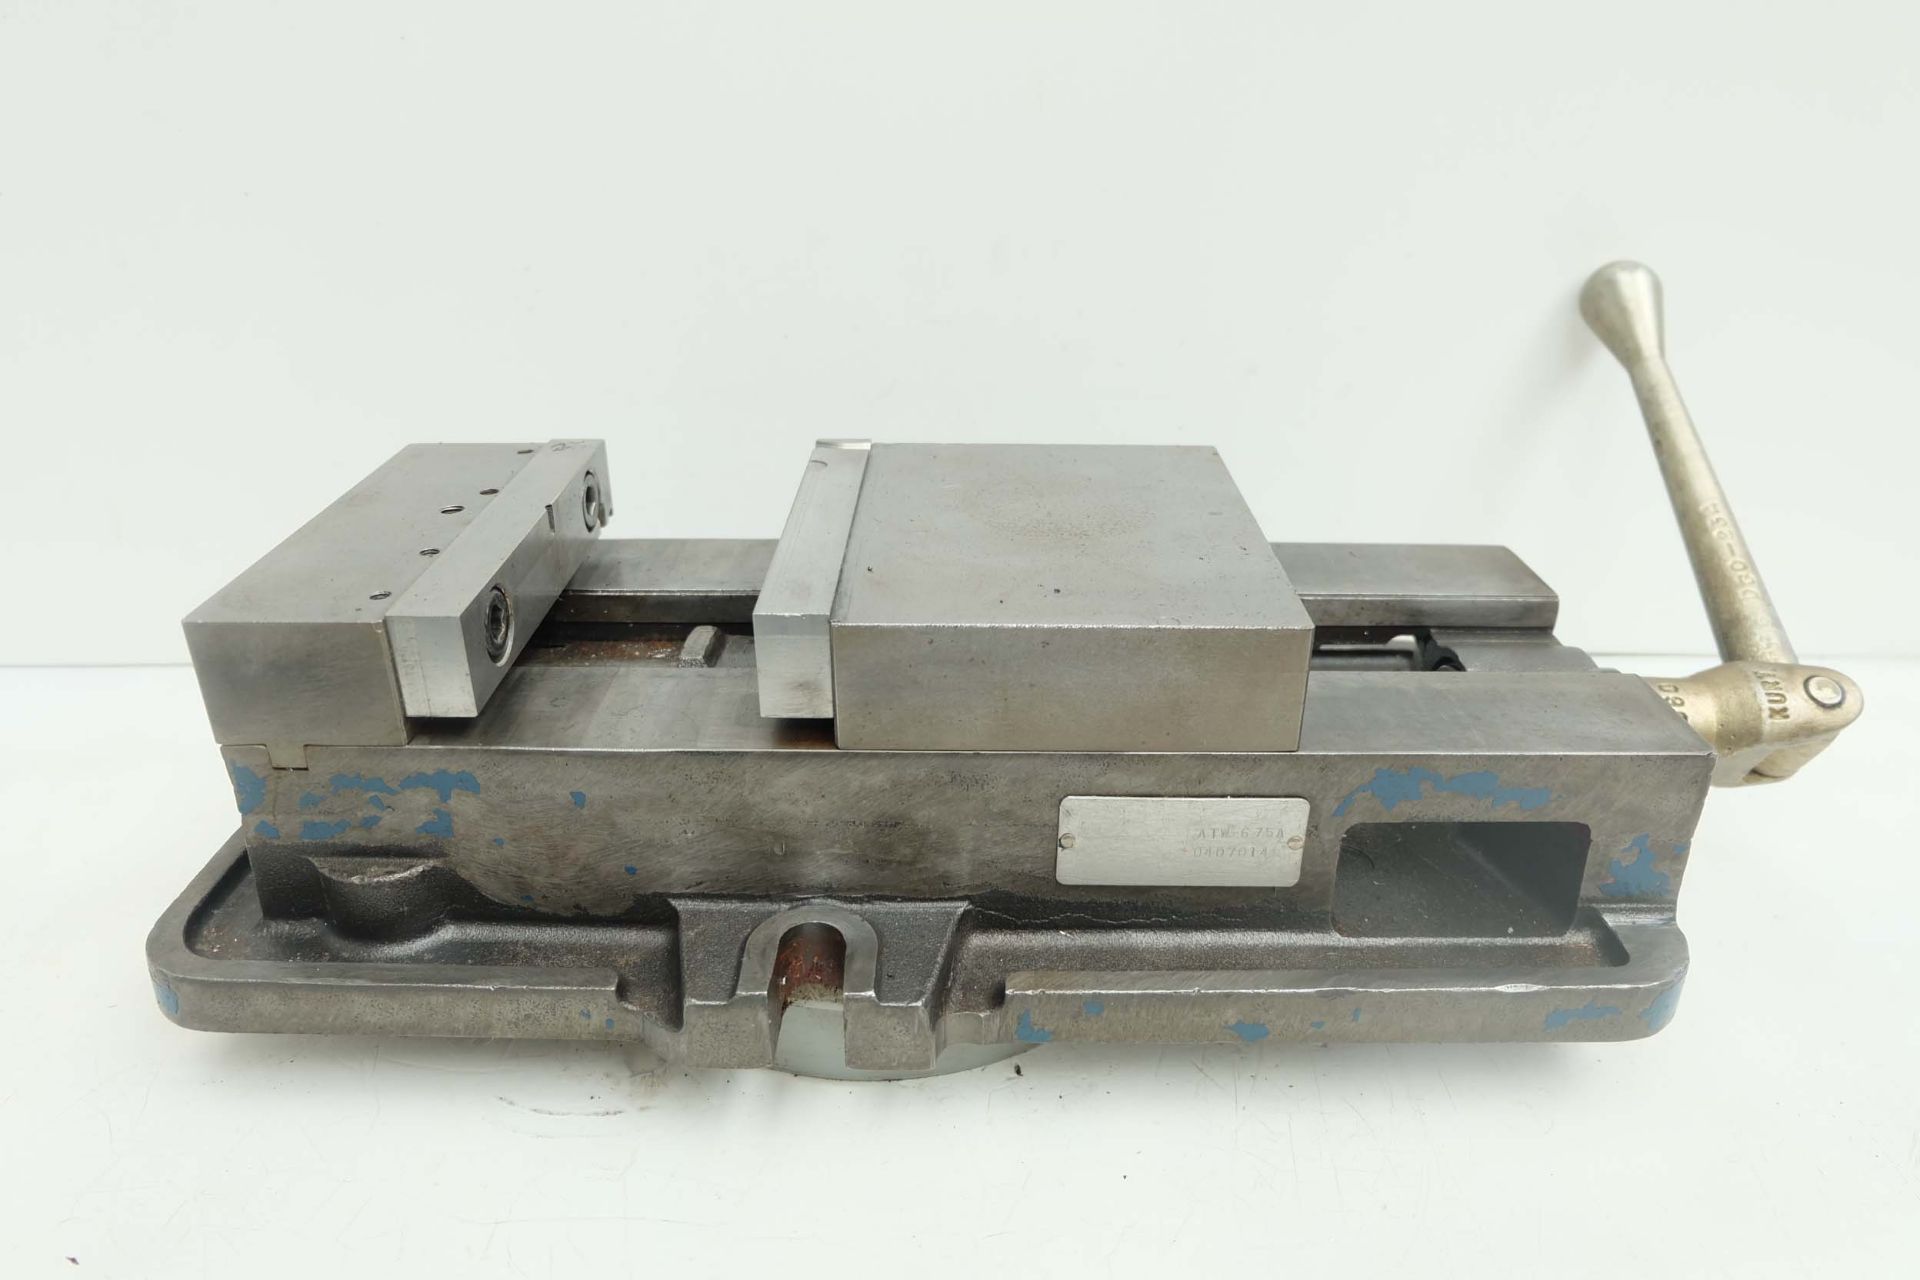 Autowell Model ATW 675A Machine Vice With Integrated Pull Down Mechanism. Width of Vice 6".